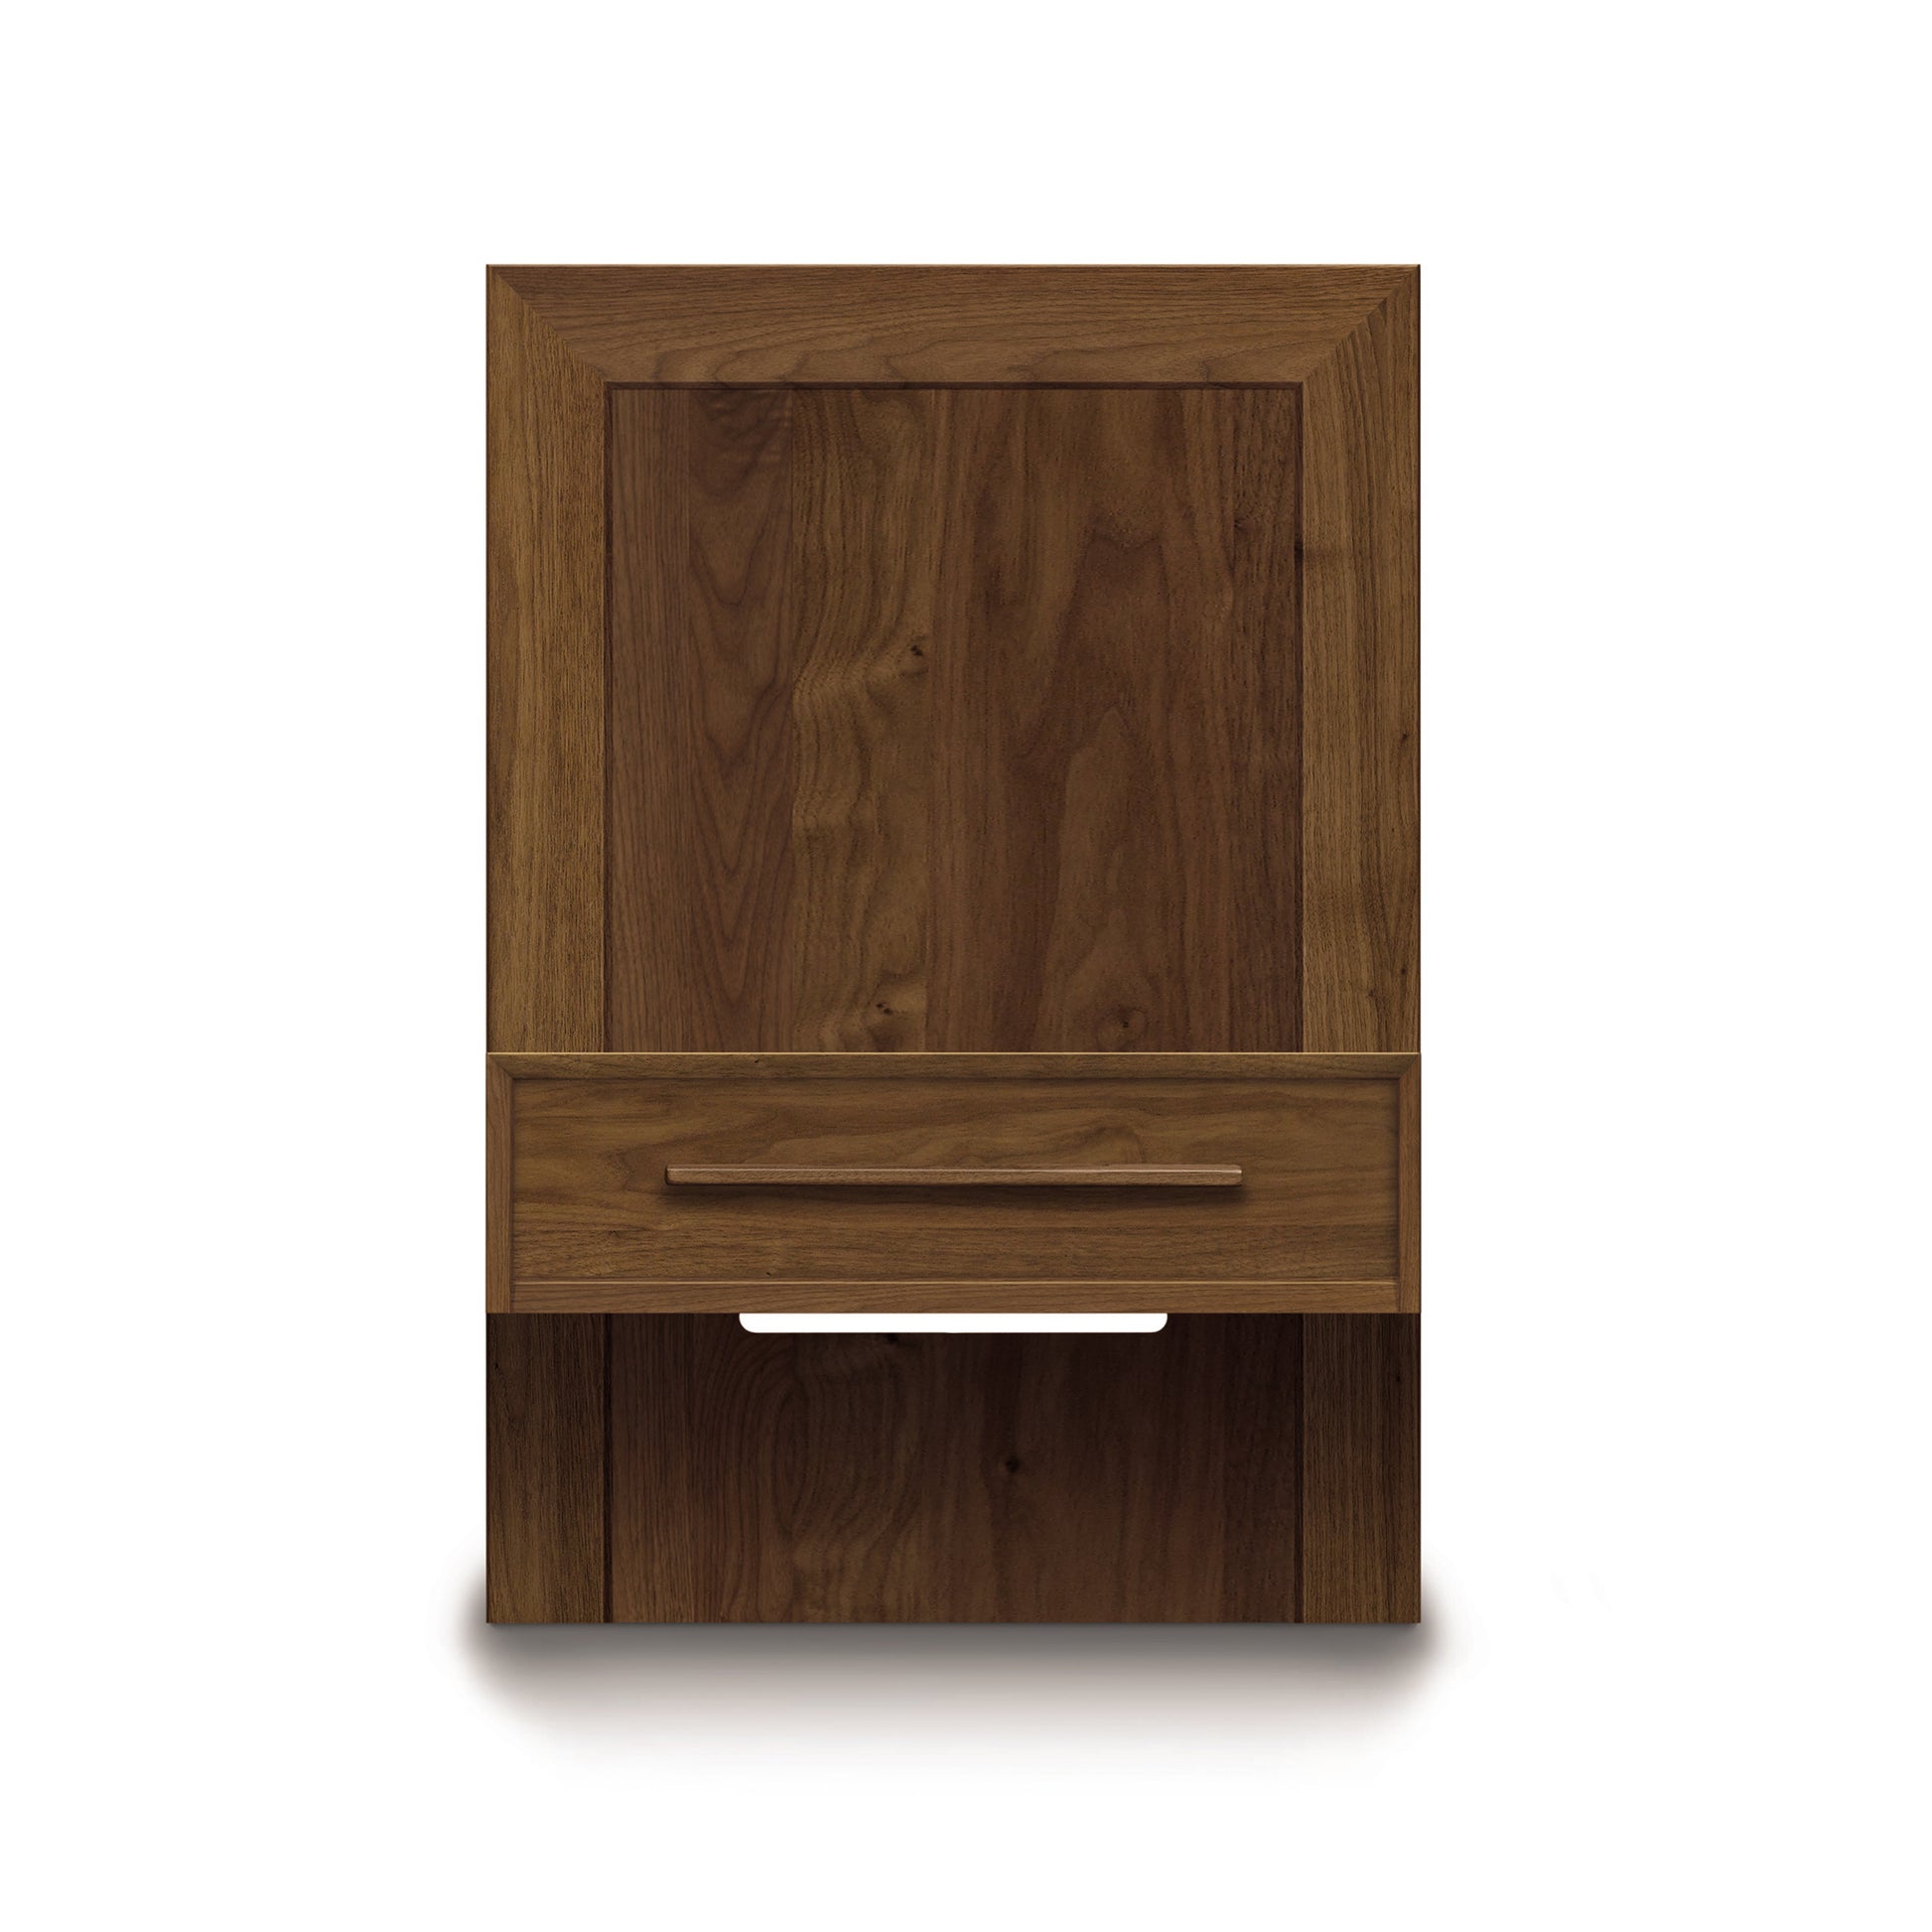 A wooden cabinet door with a single drawer, featuring a modern handle and Copeland Furniture's Moduluxe Attached Nightstand with Drawer - 35" Series, isolated on a white background.